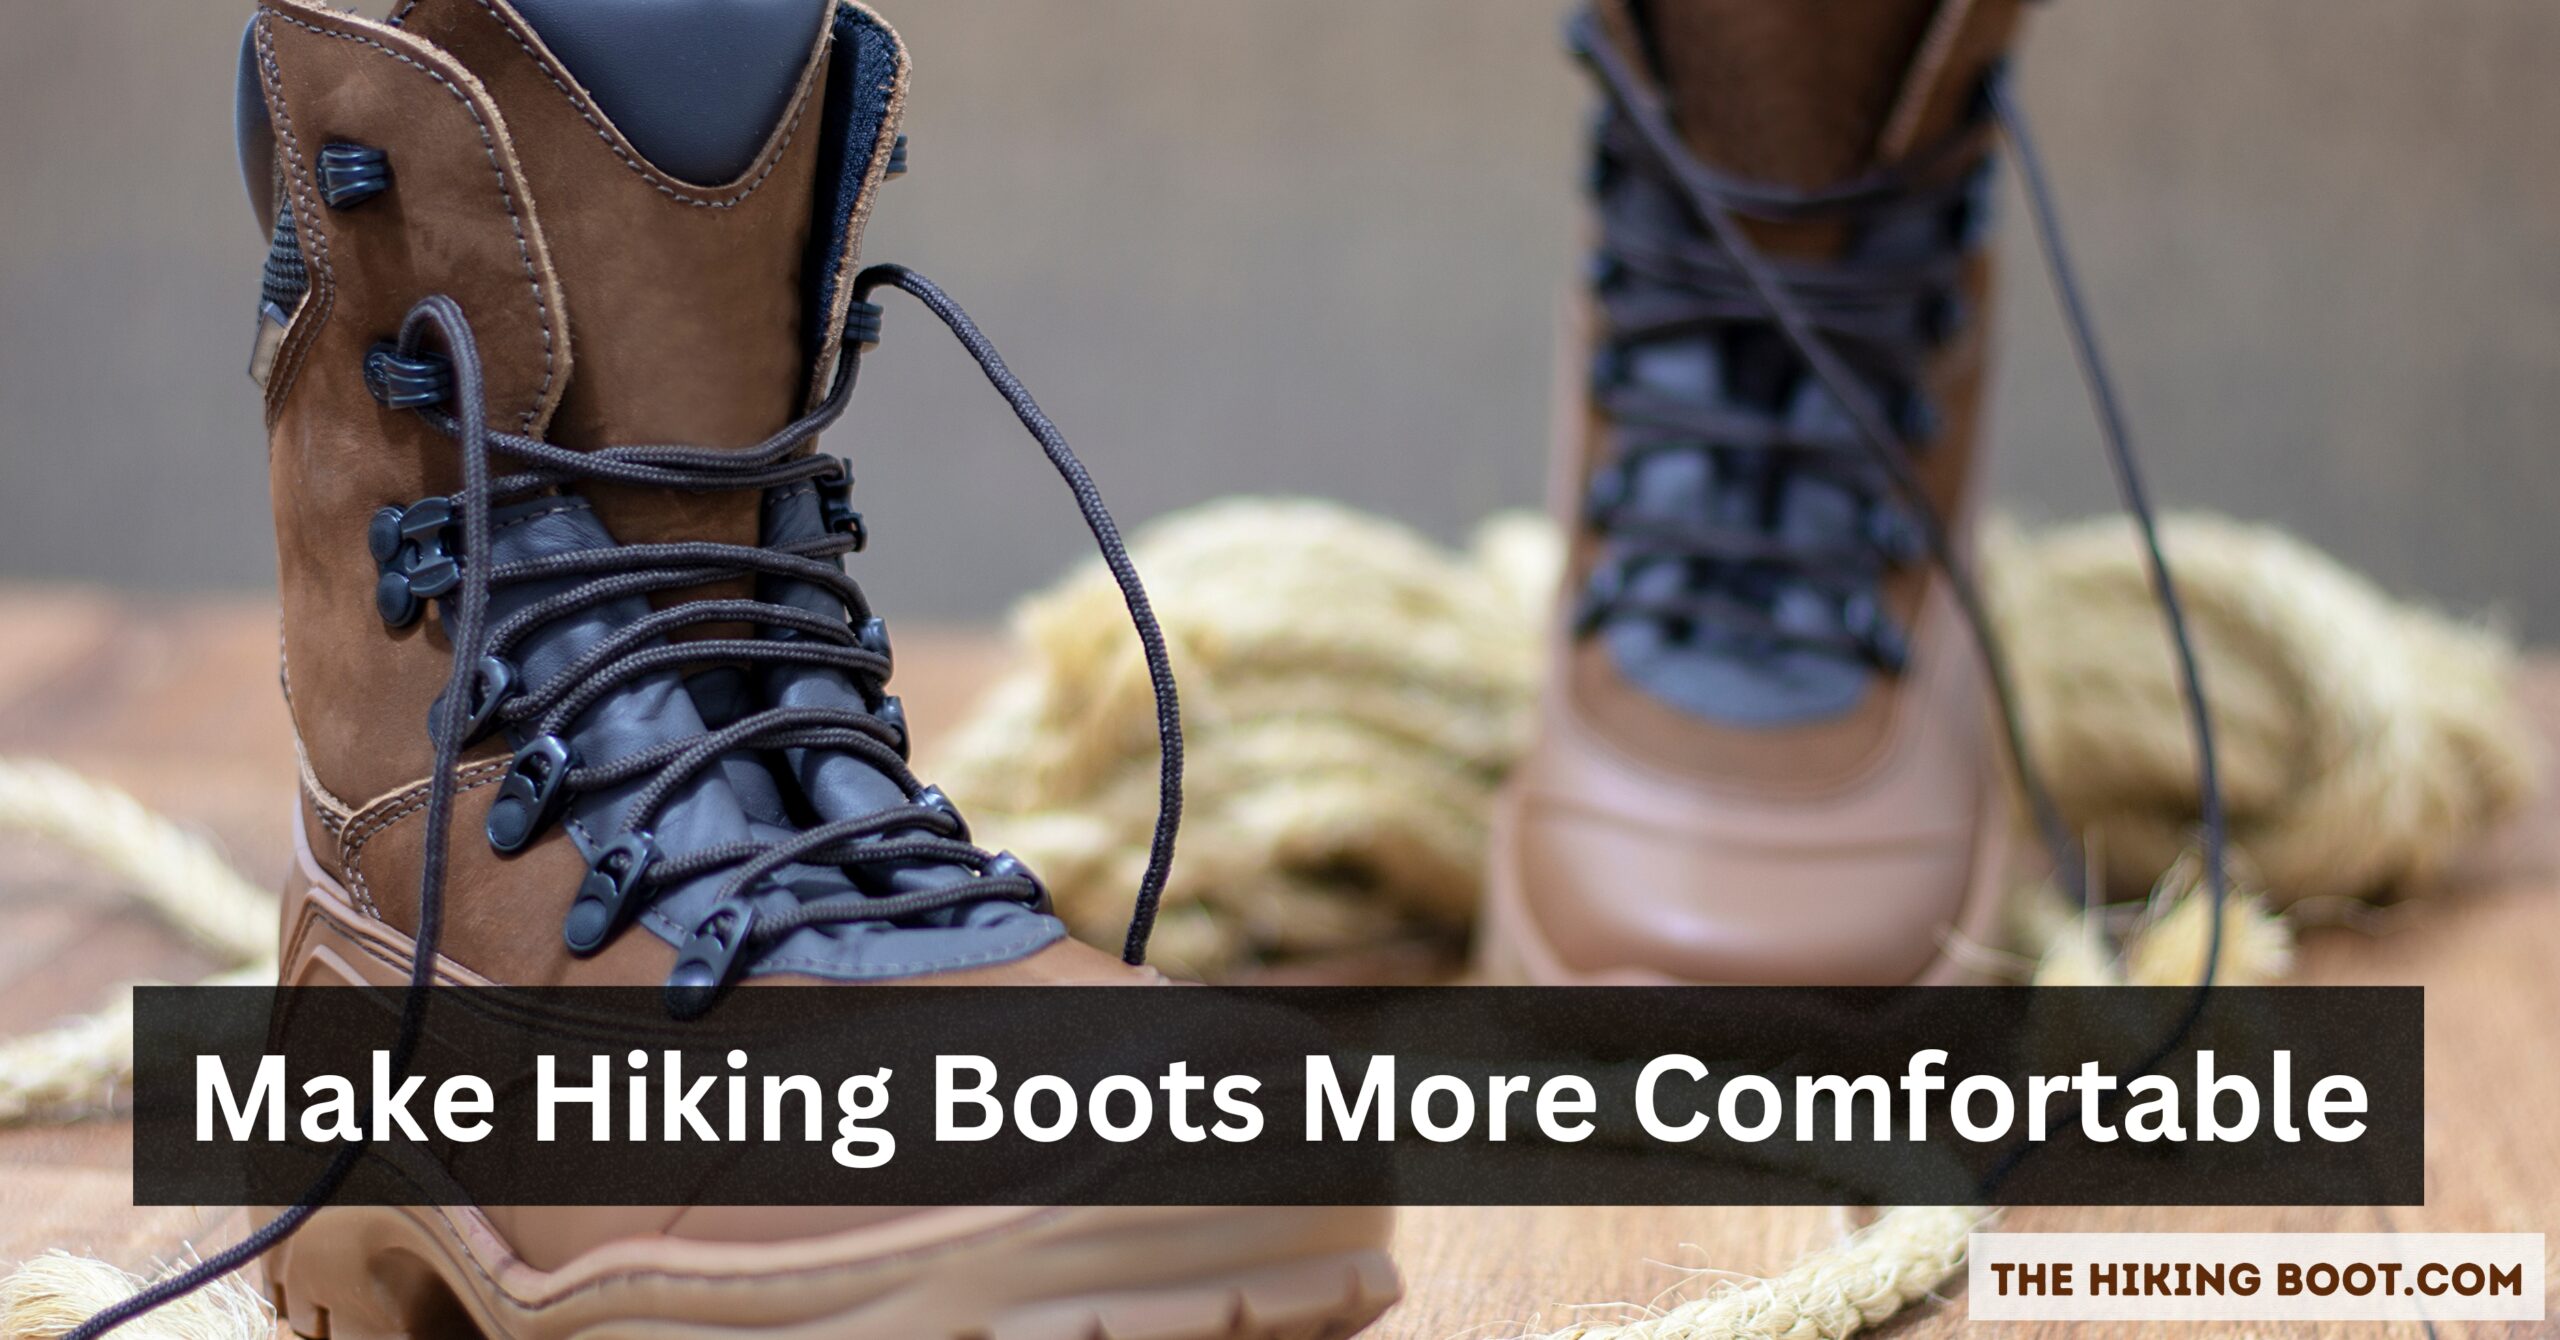 How To Make Hiking Boots More Comfortable